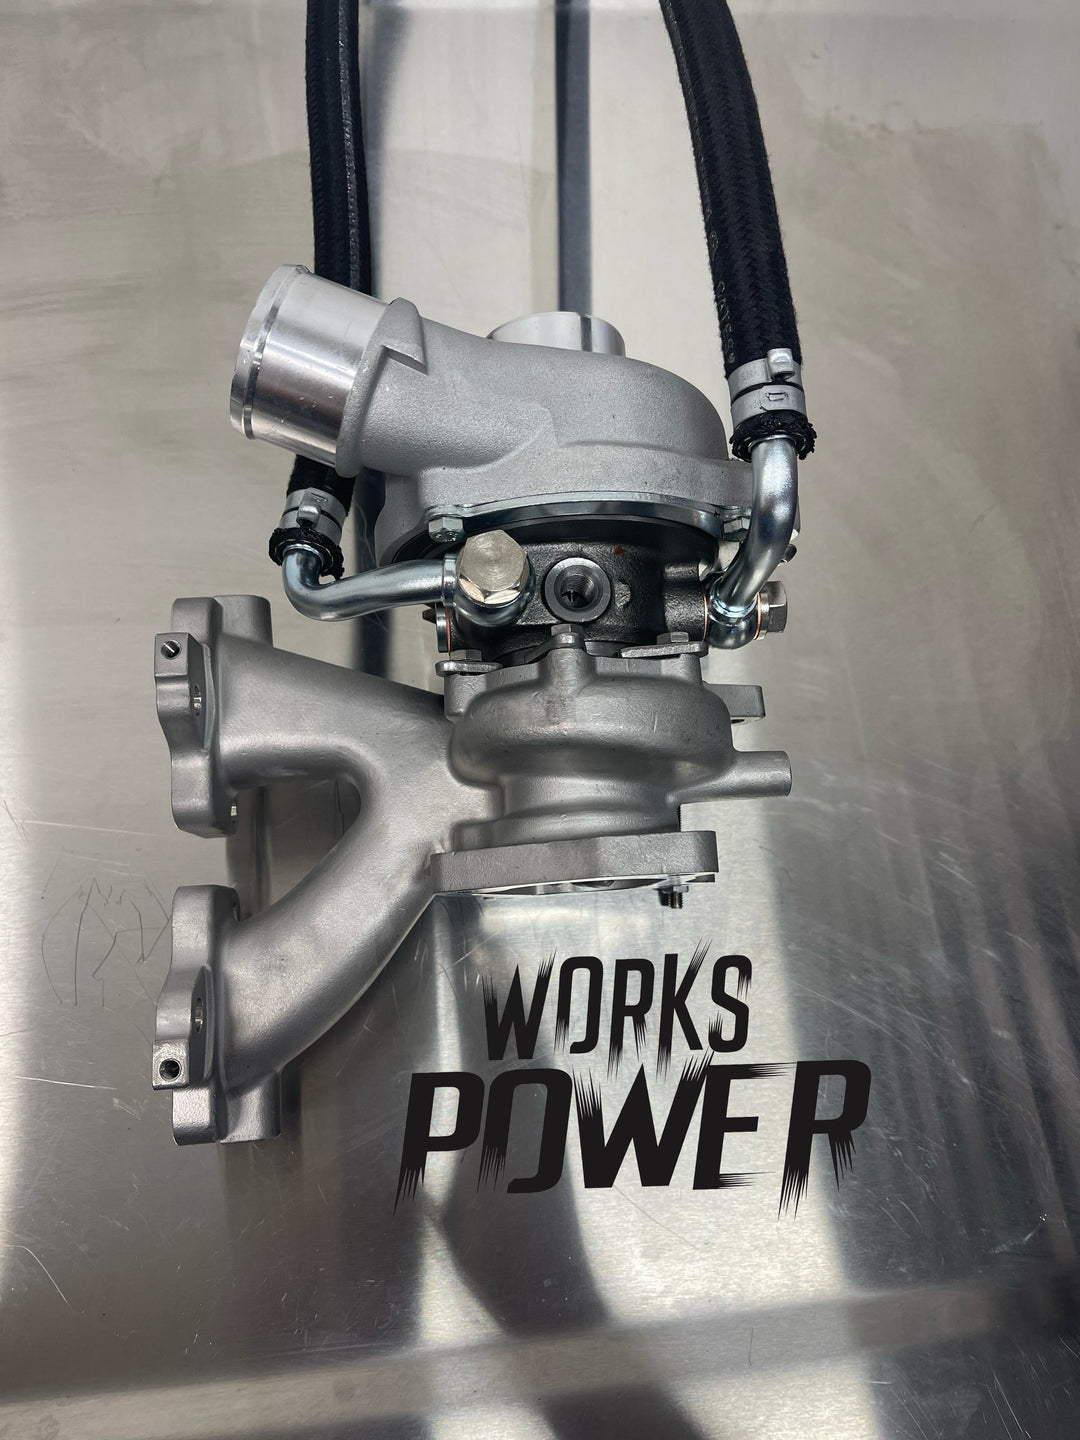 WORKS POWER WATER COOLED FACTORY BIG TURBOCHARGER - Polaris RZR Xp Turbo, Turbo S